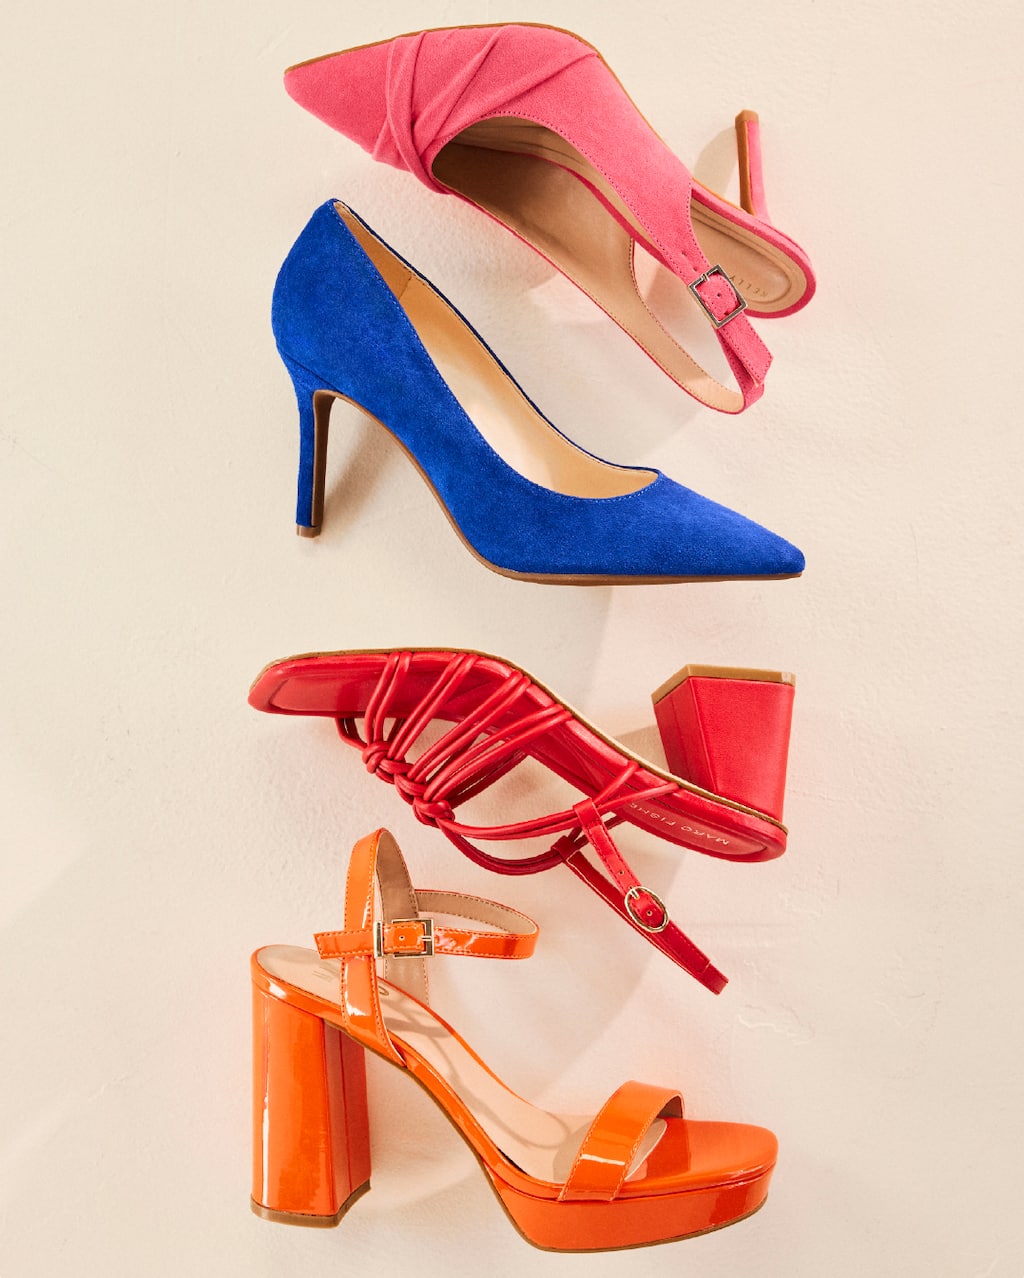 https://images.dsw.com/is/image/DSWShoes/P240393_editorial_color-heels?impolicy=qlt-medium&imwidth=1011&imdensity=1